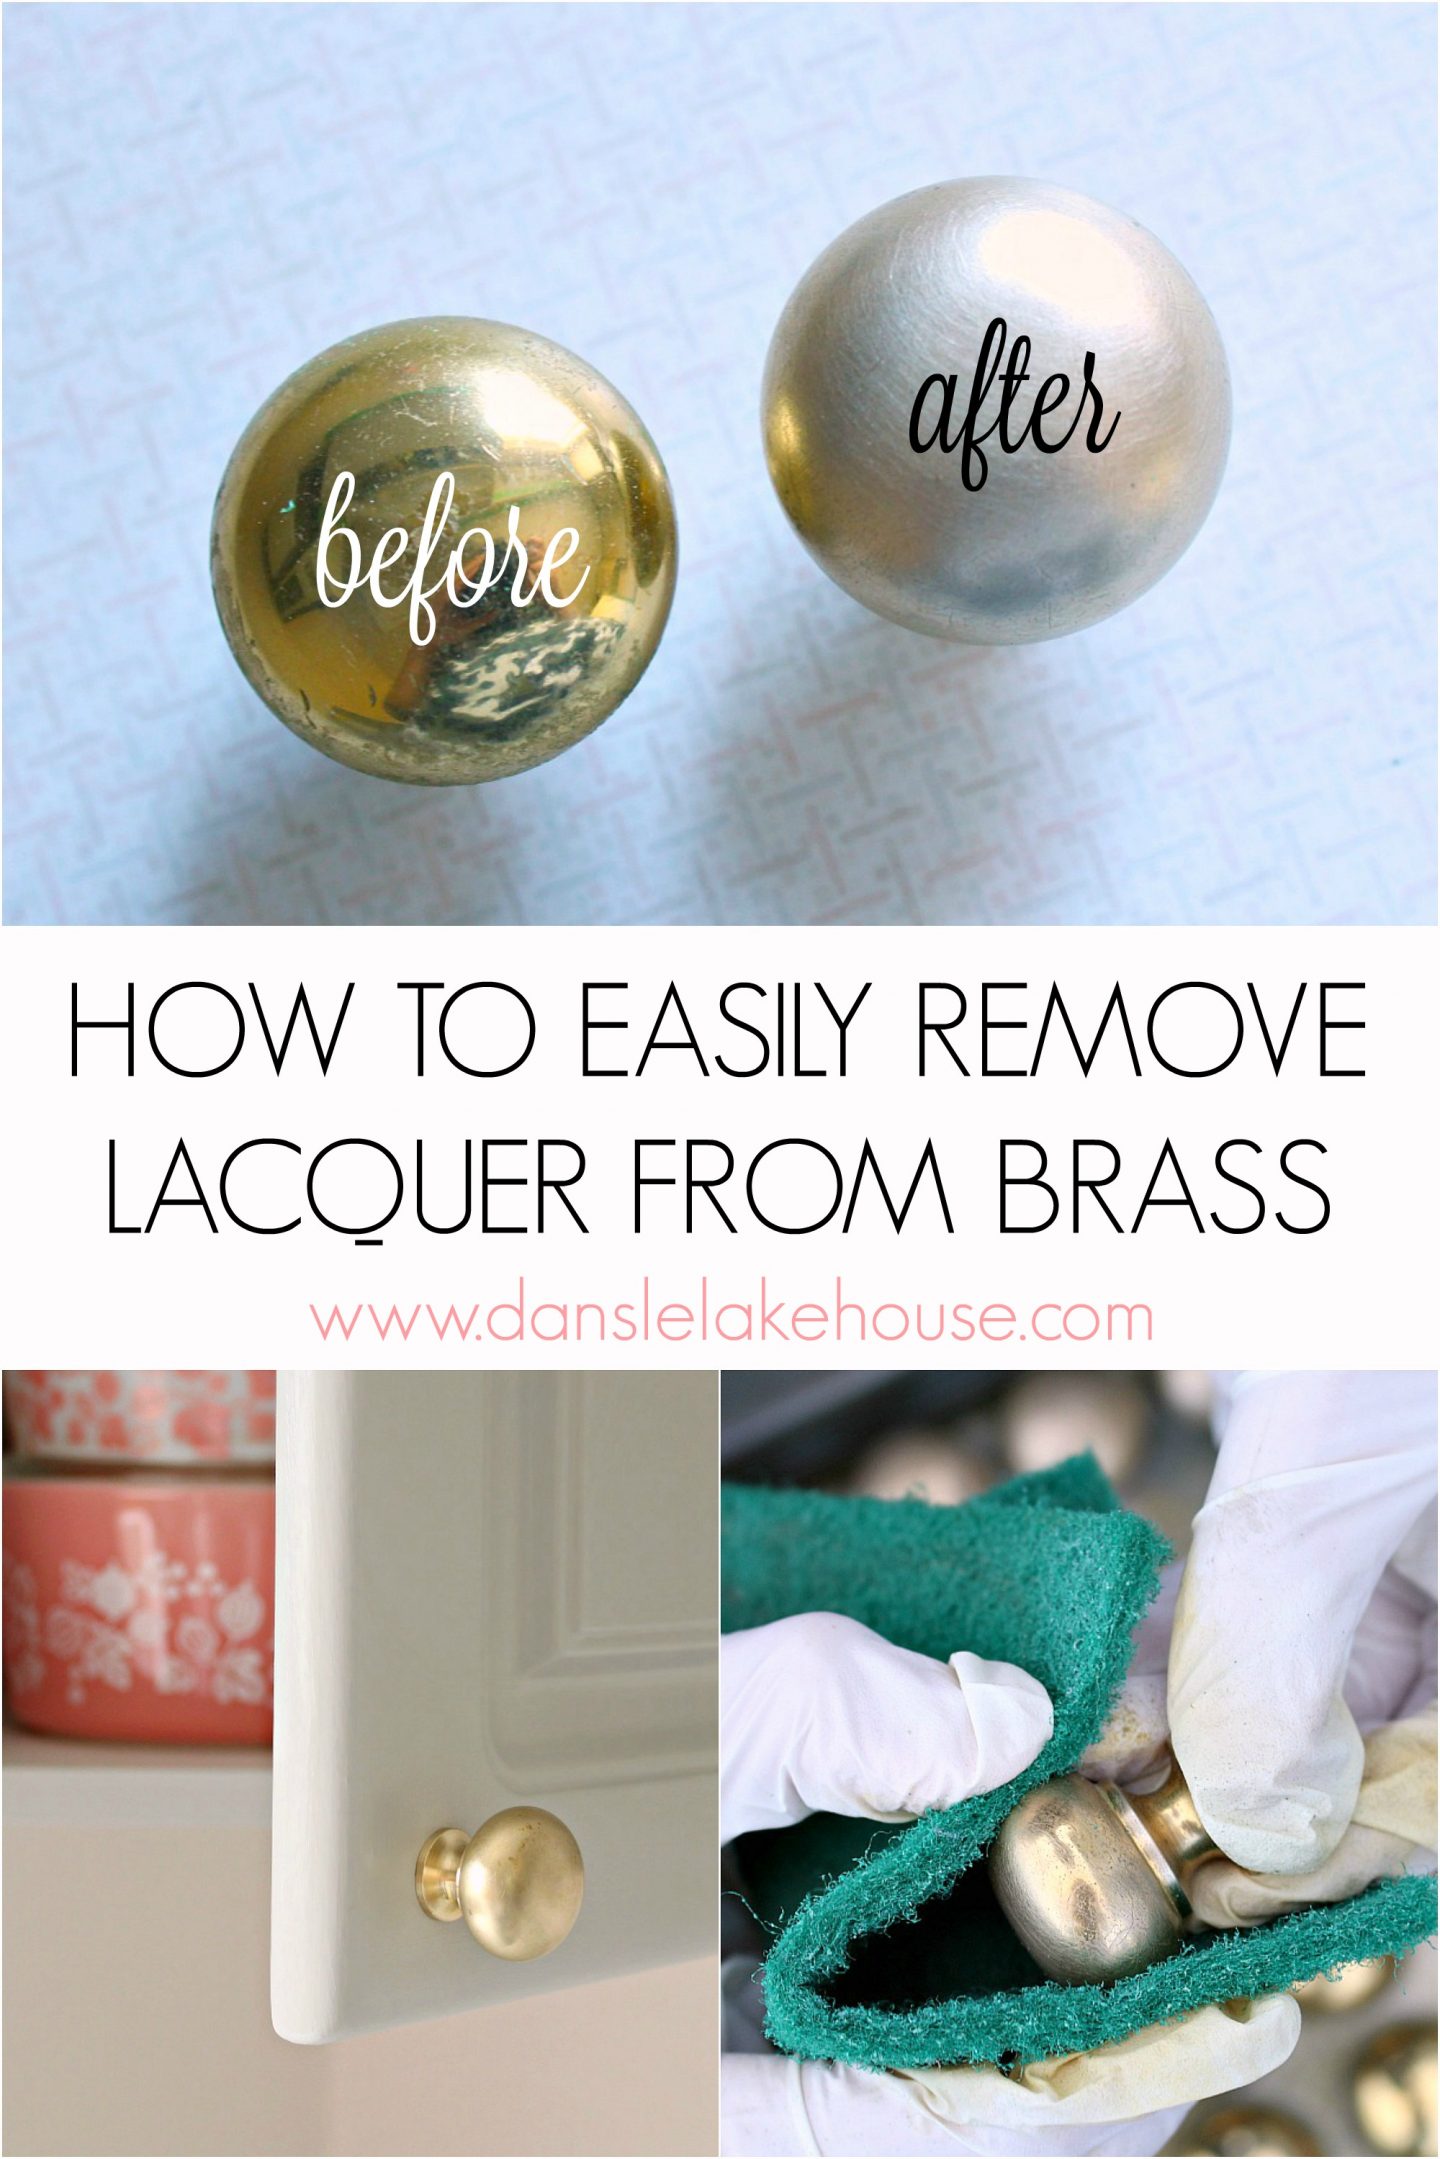 How to Remove Lacquer From Brass to Reveal a Brushed Finish